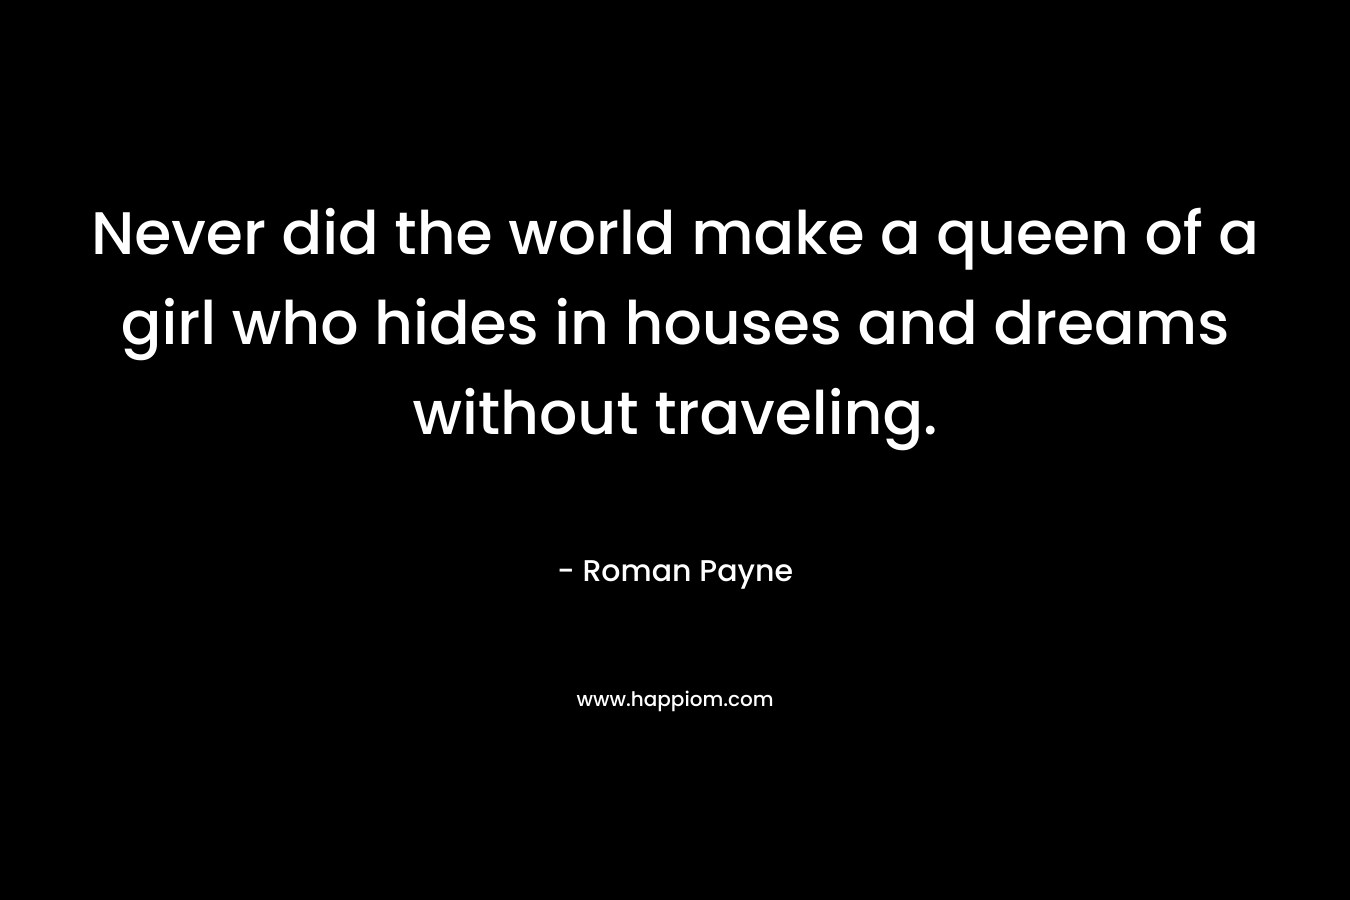 Never did the world make a queen of a girl who hides in houses and dreams without traveling. – Roman Payne